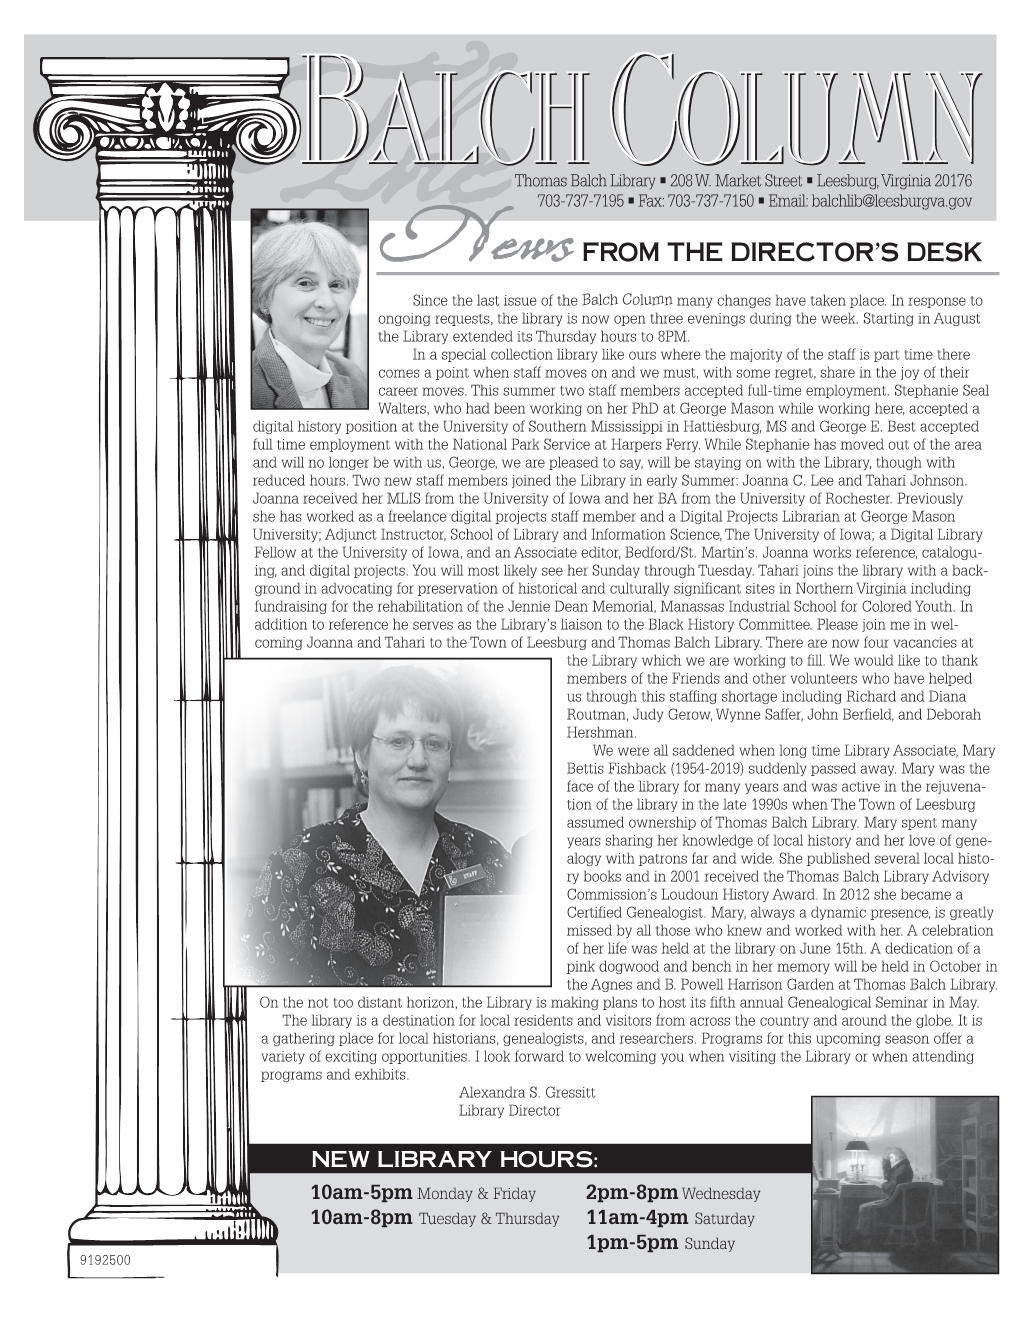 News from the DIRECTOR’S DESK Since the Last Issue of the Balch Column Many Changes Have Taken Place